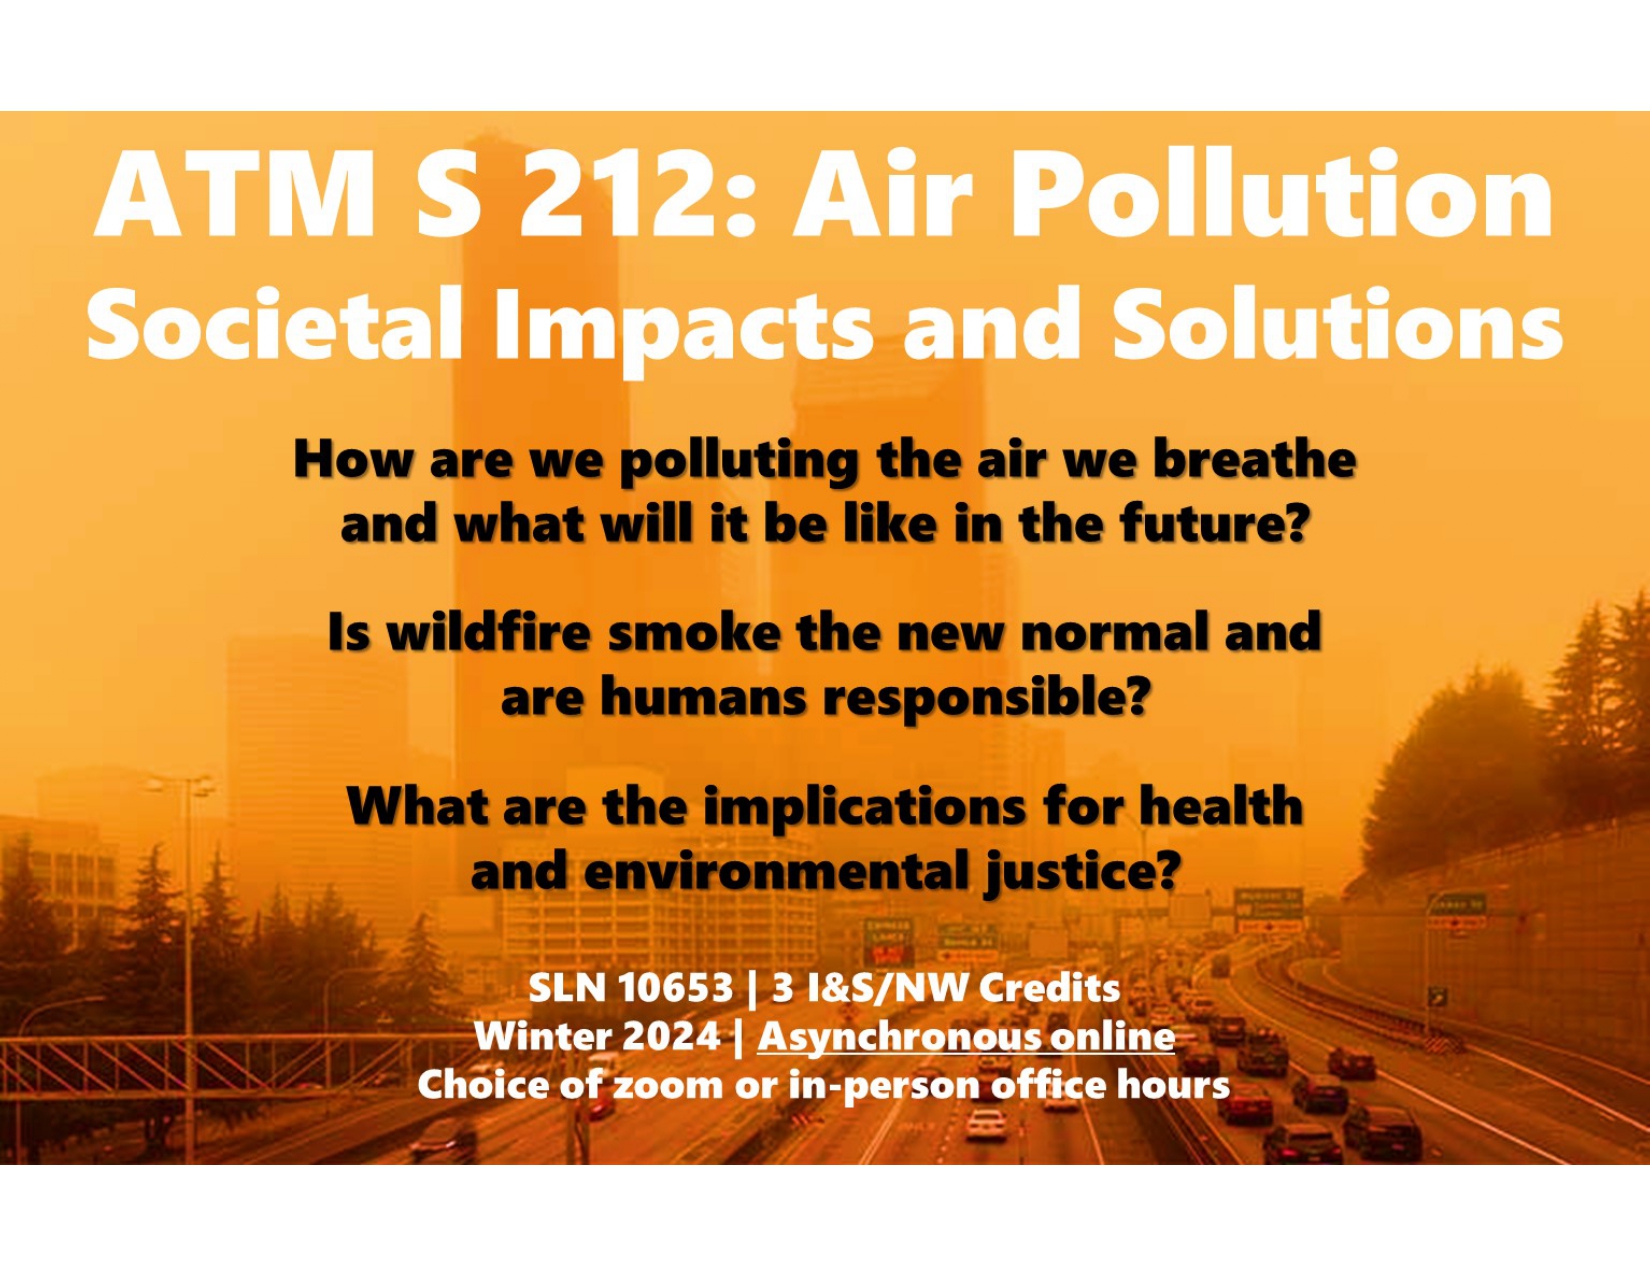 [Advisers] ATM S 212 Air Pollution course offered in Winter 2024 Quarter